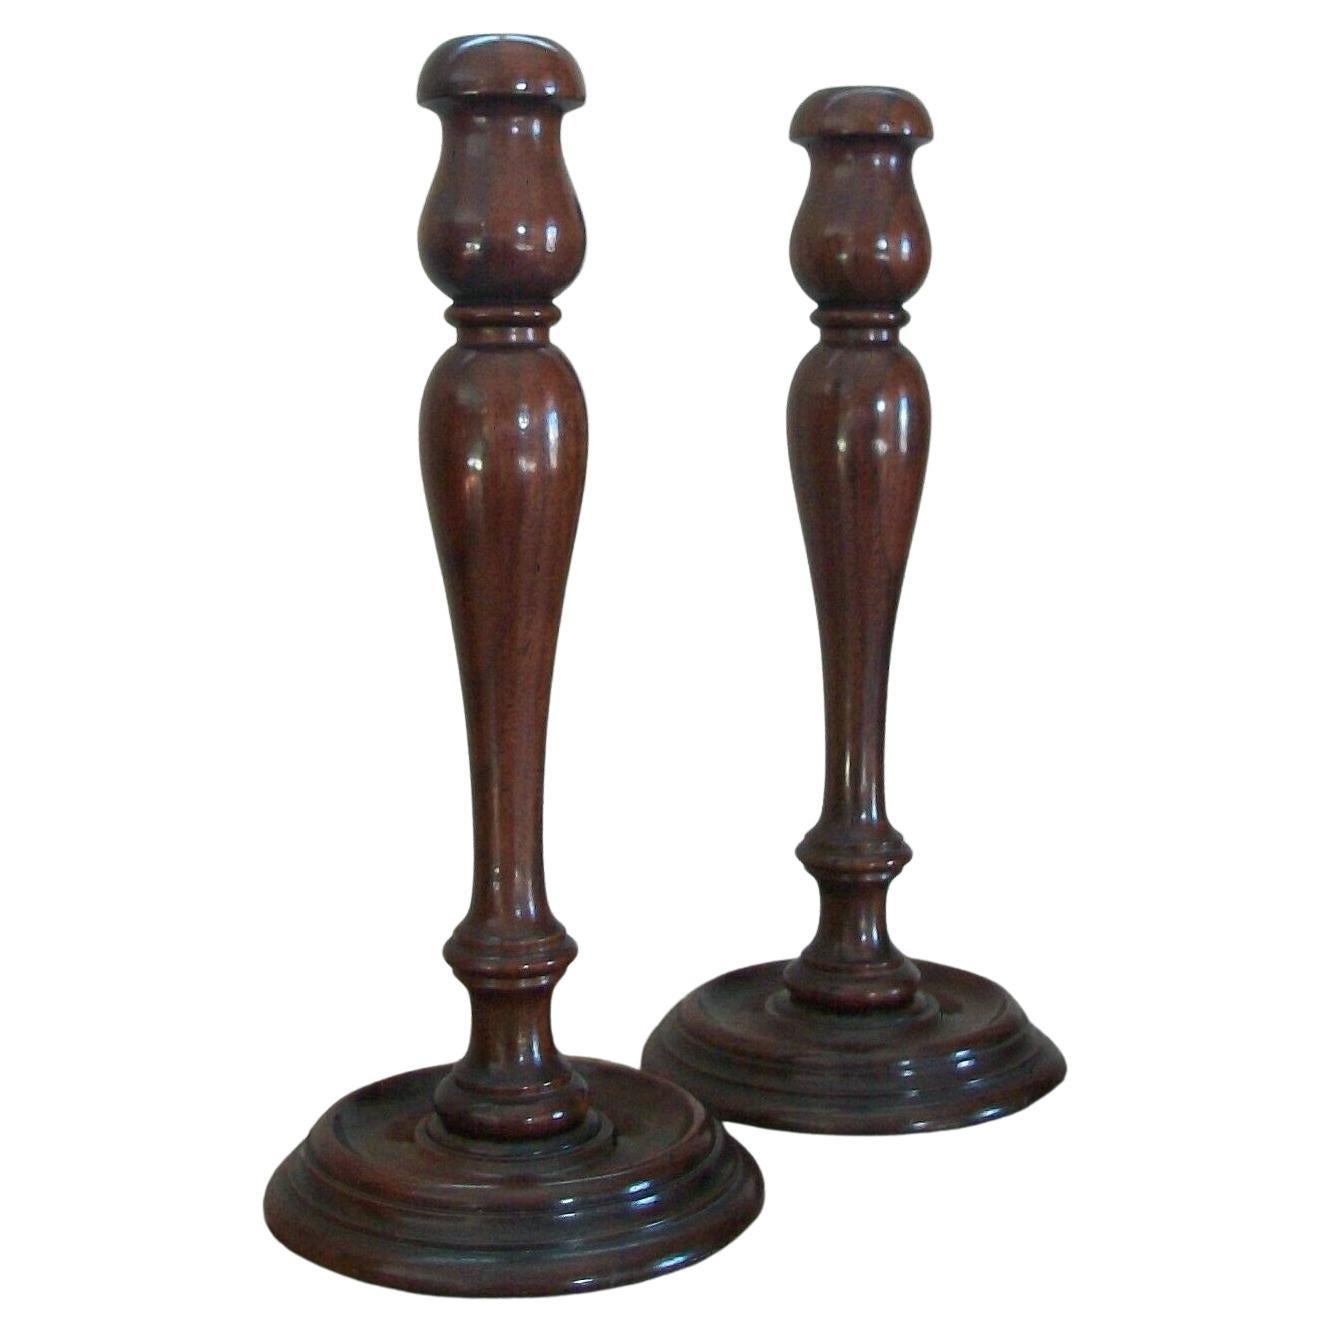 Antique Large Pair of Hardwood Candlesticks - Rich Patina - U.S.A., C.1900 For Sale